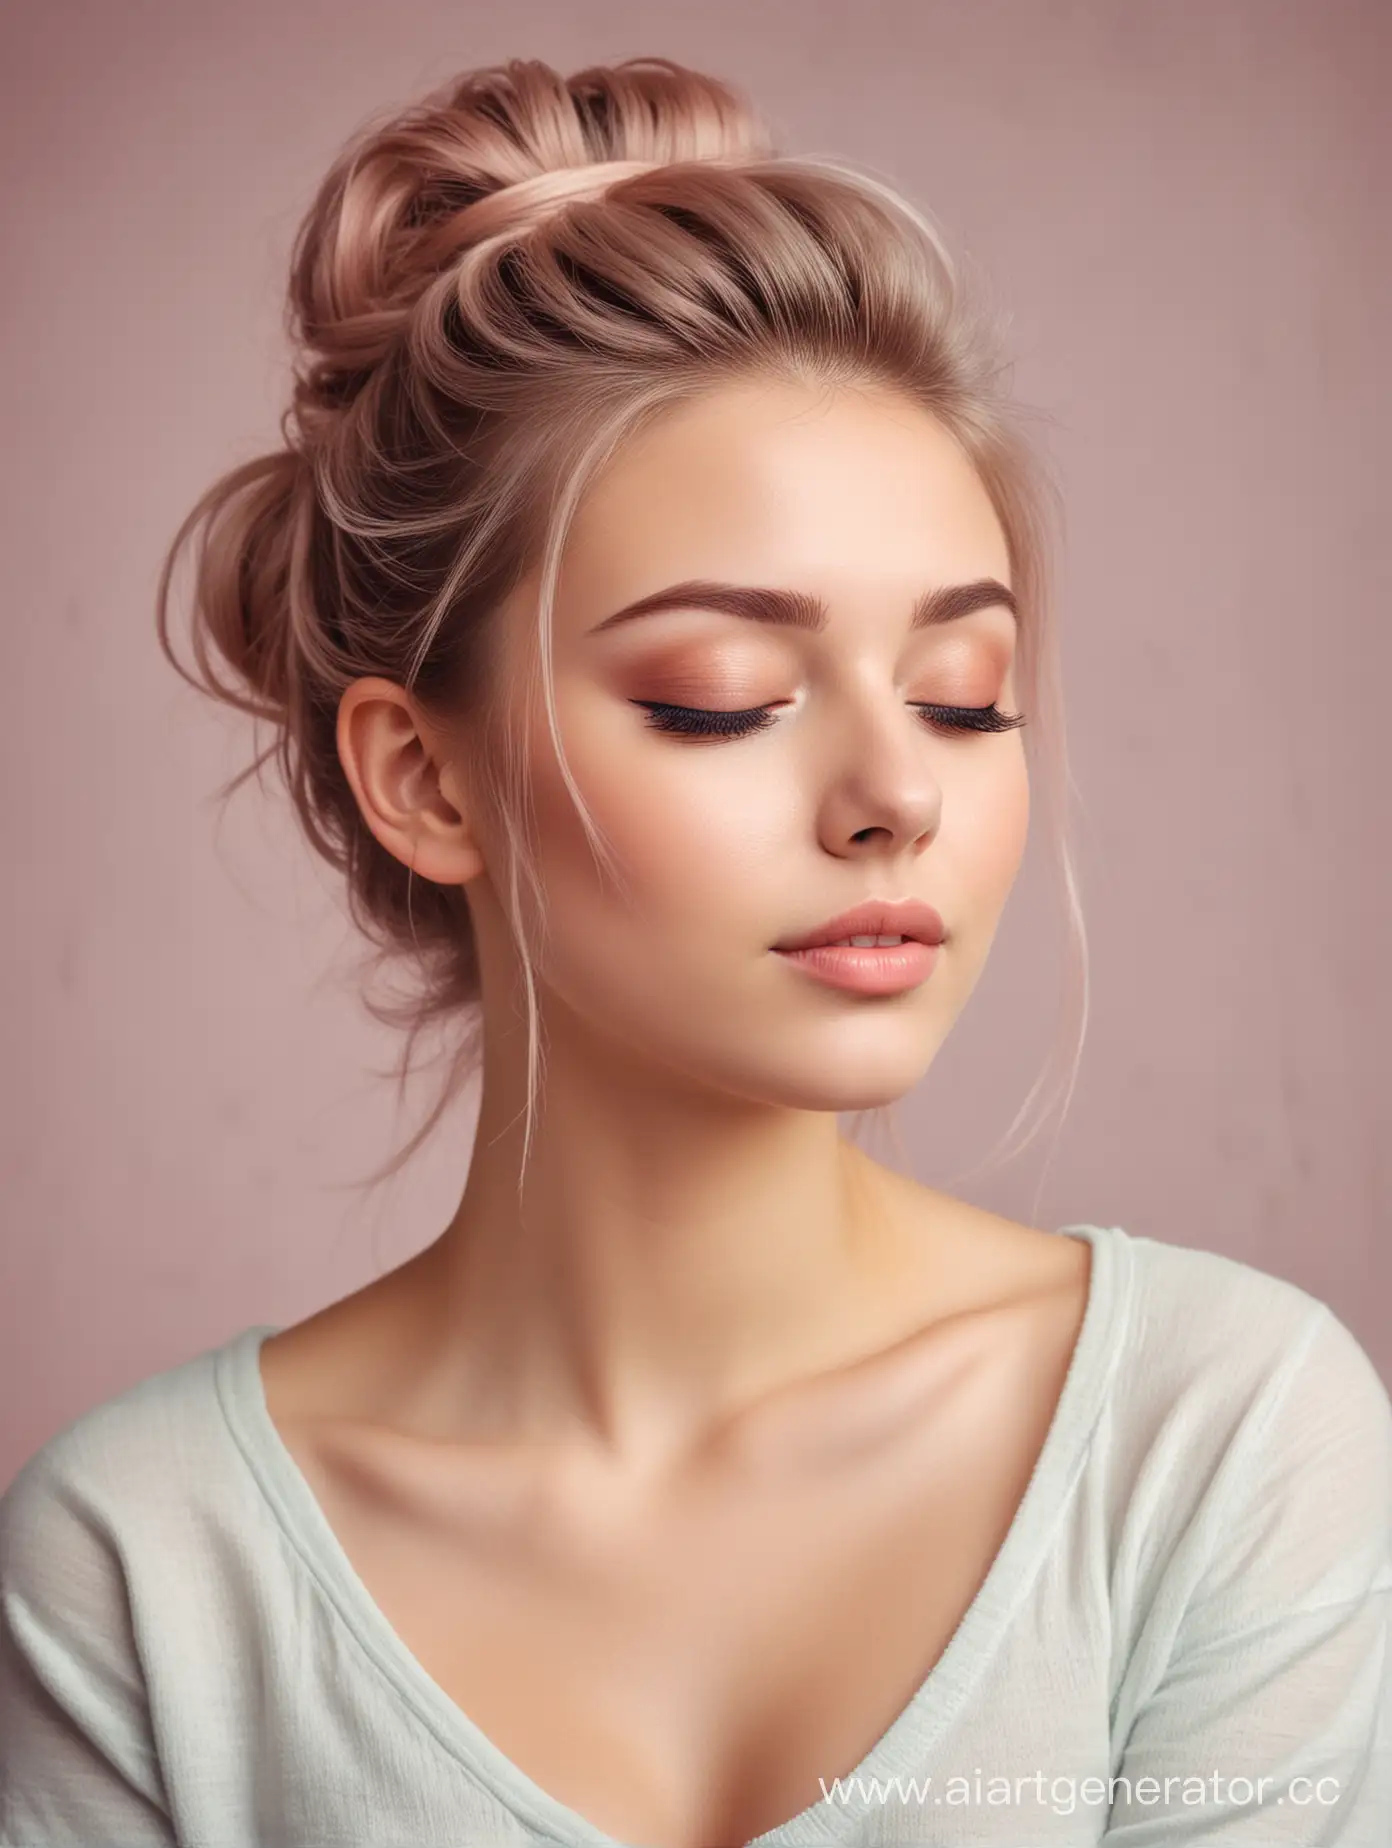 Dreamy-Young-Woman-with-Updo-Hairstyle-in-Soft-Pastel-Tones